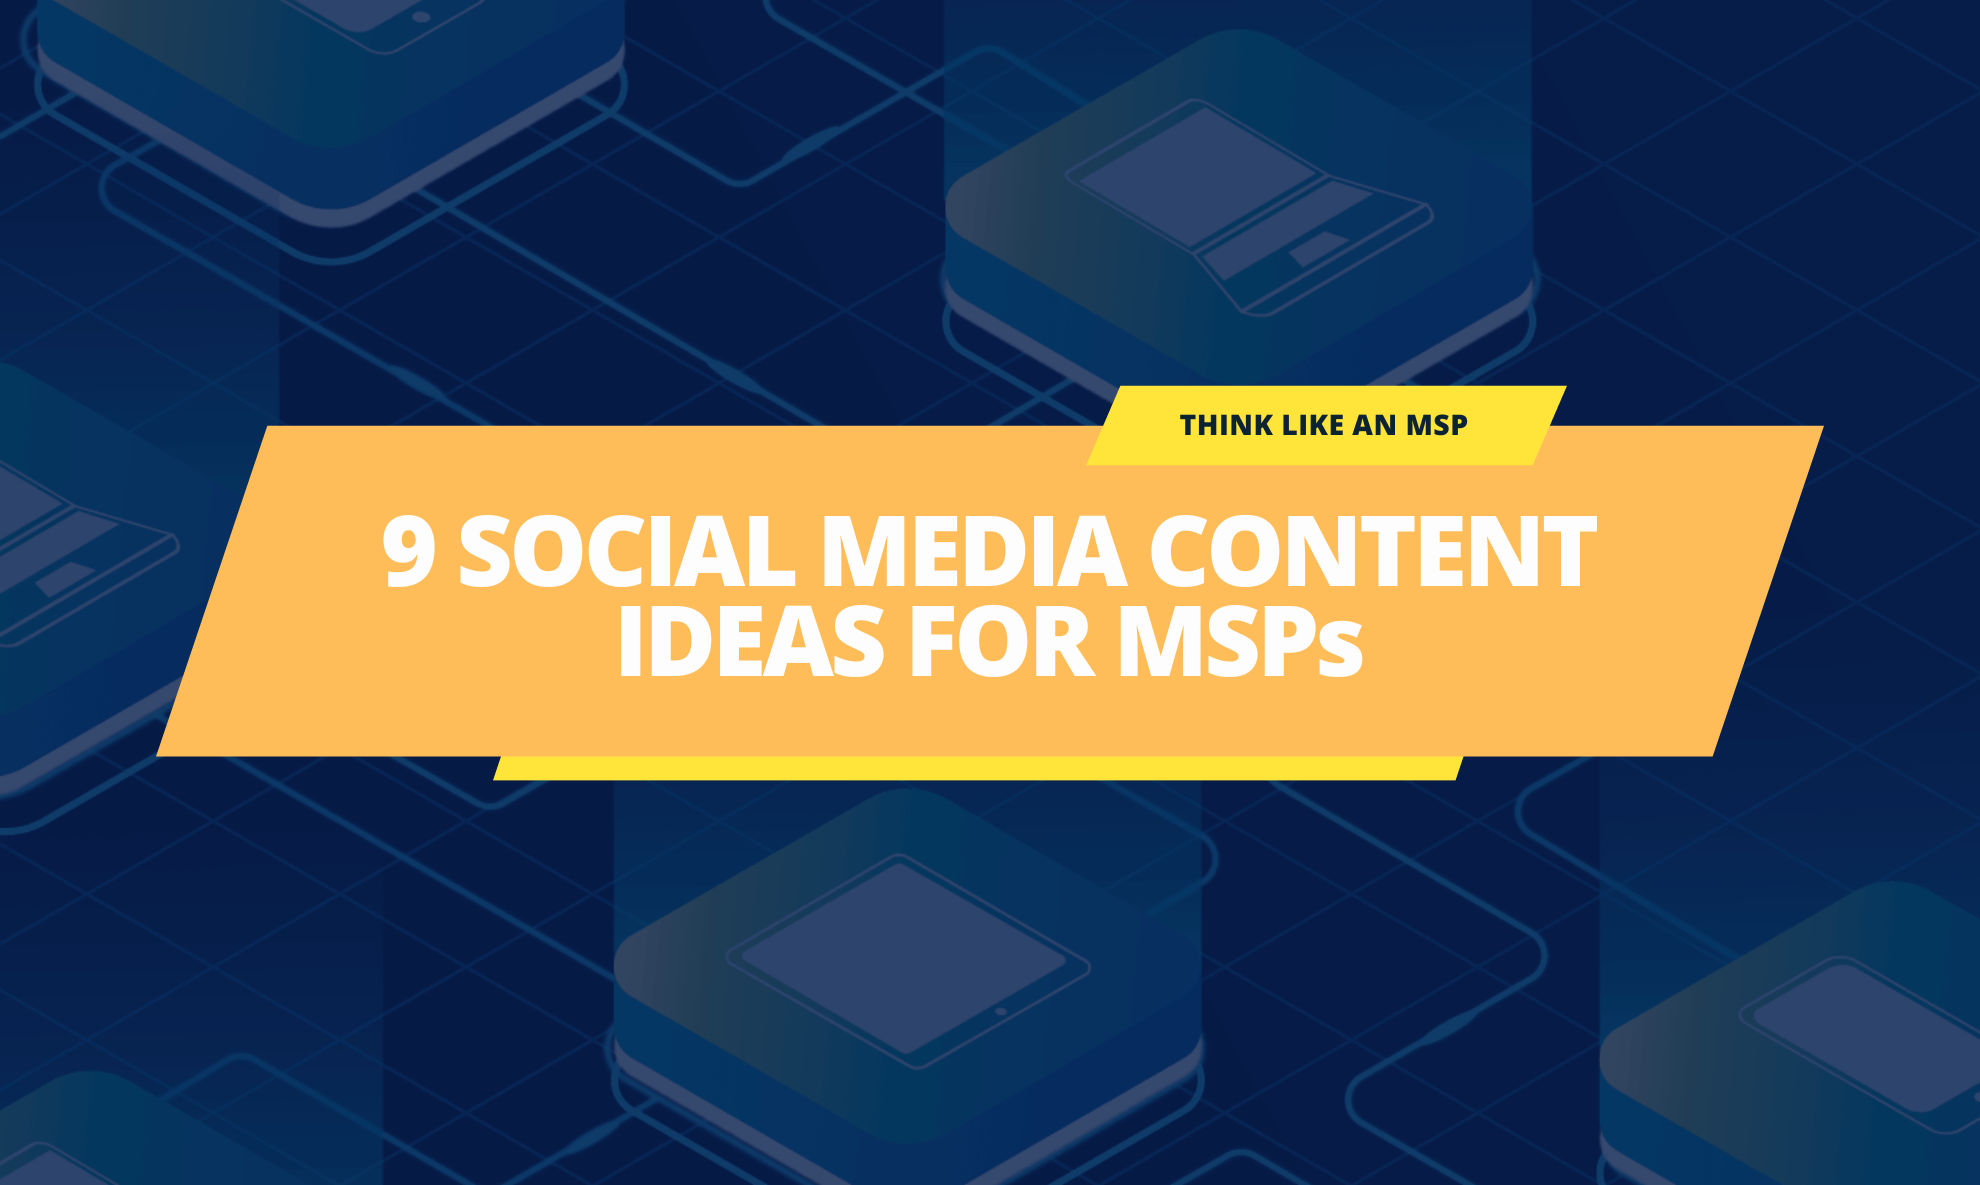 9 Engaging Social Media Content Ideas for MSPs